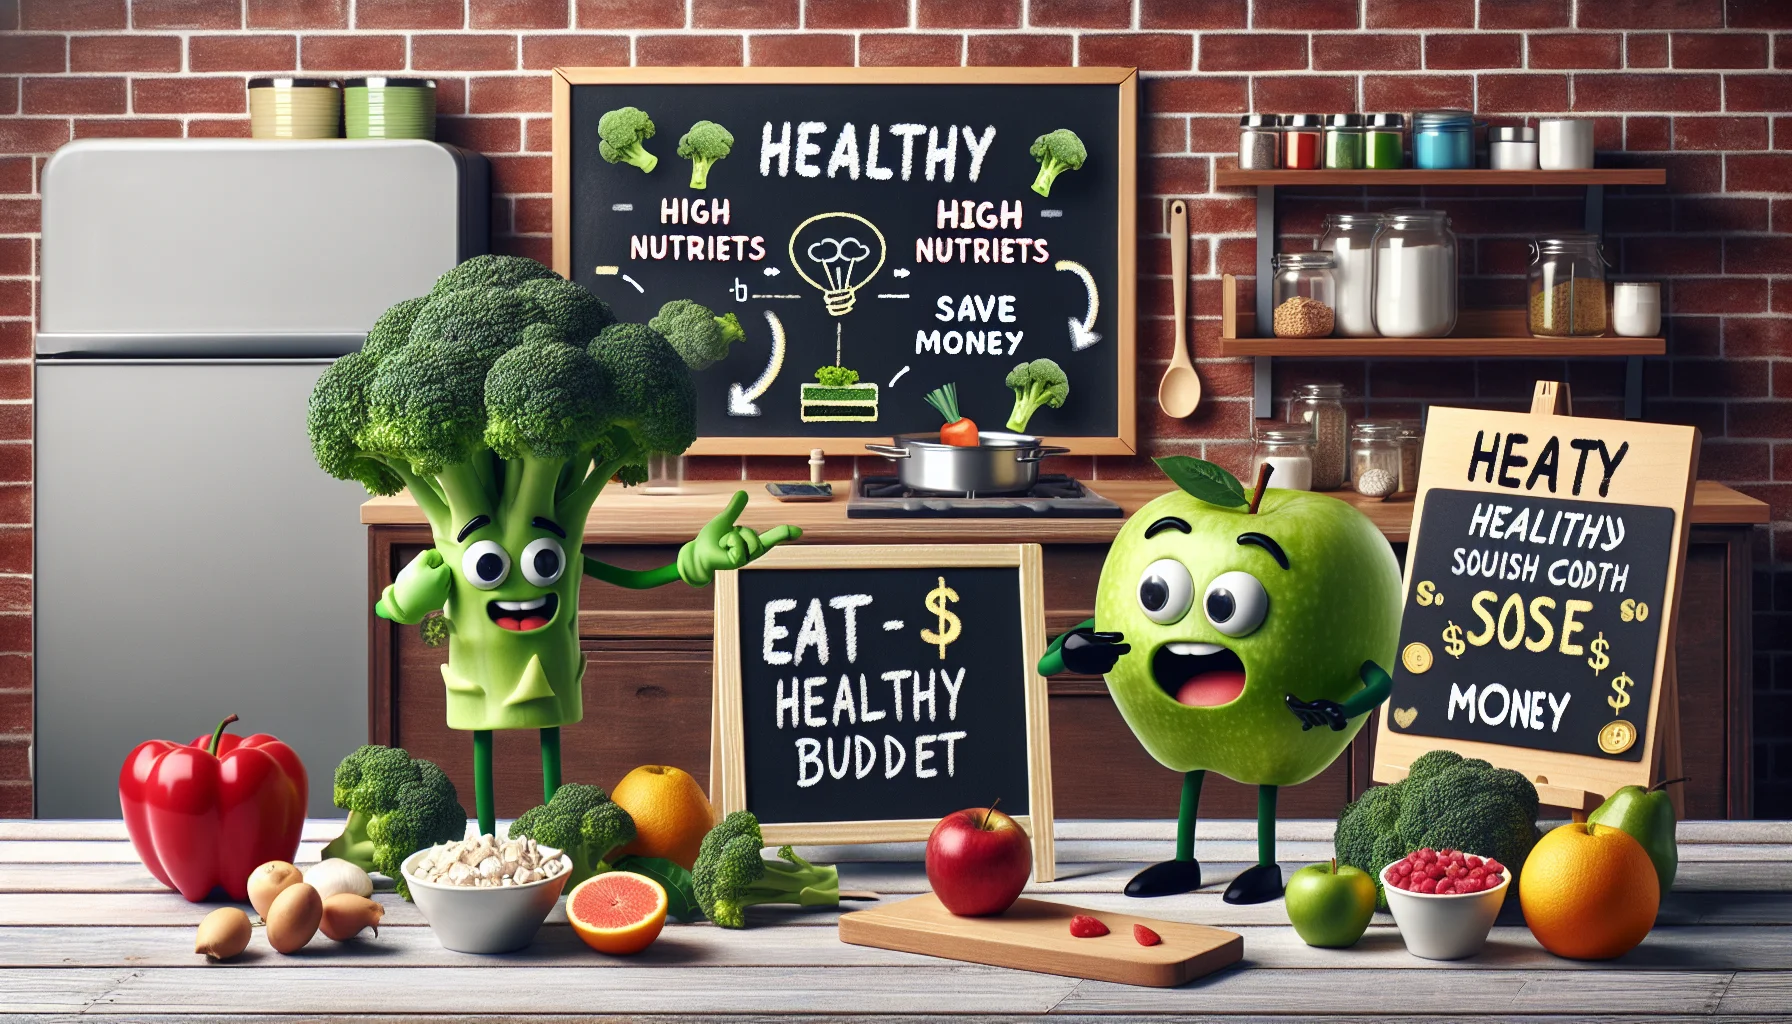 Create a humorous and realistic image that promotes healthy eating for less money. The setting should be a kitchen where a couple of happy vegetables and fruits characters are preparing meals. Show some cunning broccoli suggesting an economic dish rich in fiber to an astonished apple. Around them, display signs promoting the benefits of healthy and budget-friendly eating, such as 'High nutrients, low cost', 'Eat smart, save money'. Don't forget to add a blackboard in the background showing a funny diagram about the 'Eat Healthy Budget Plan'.